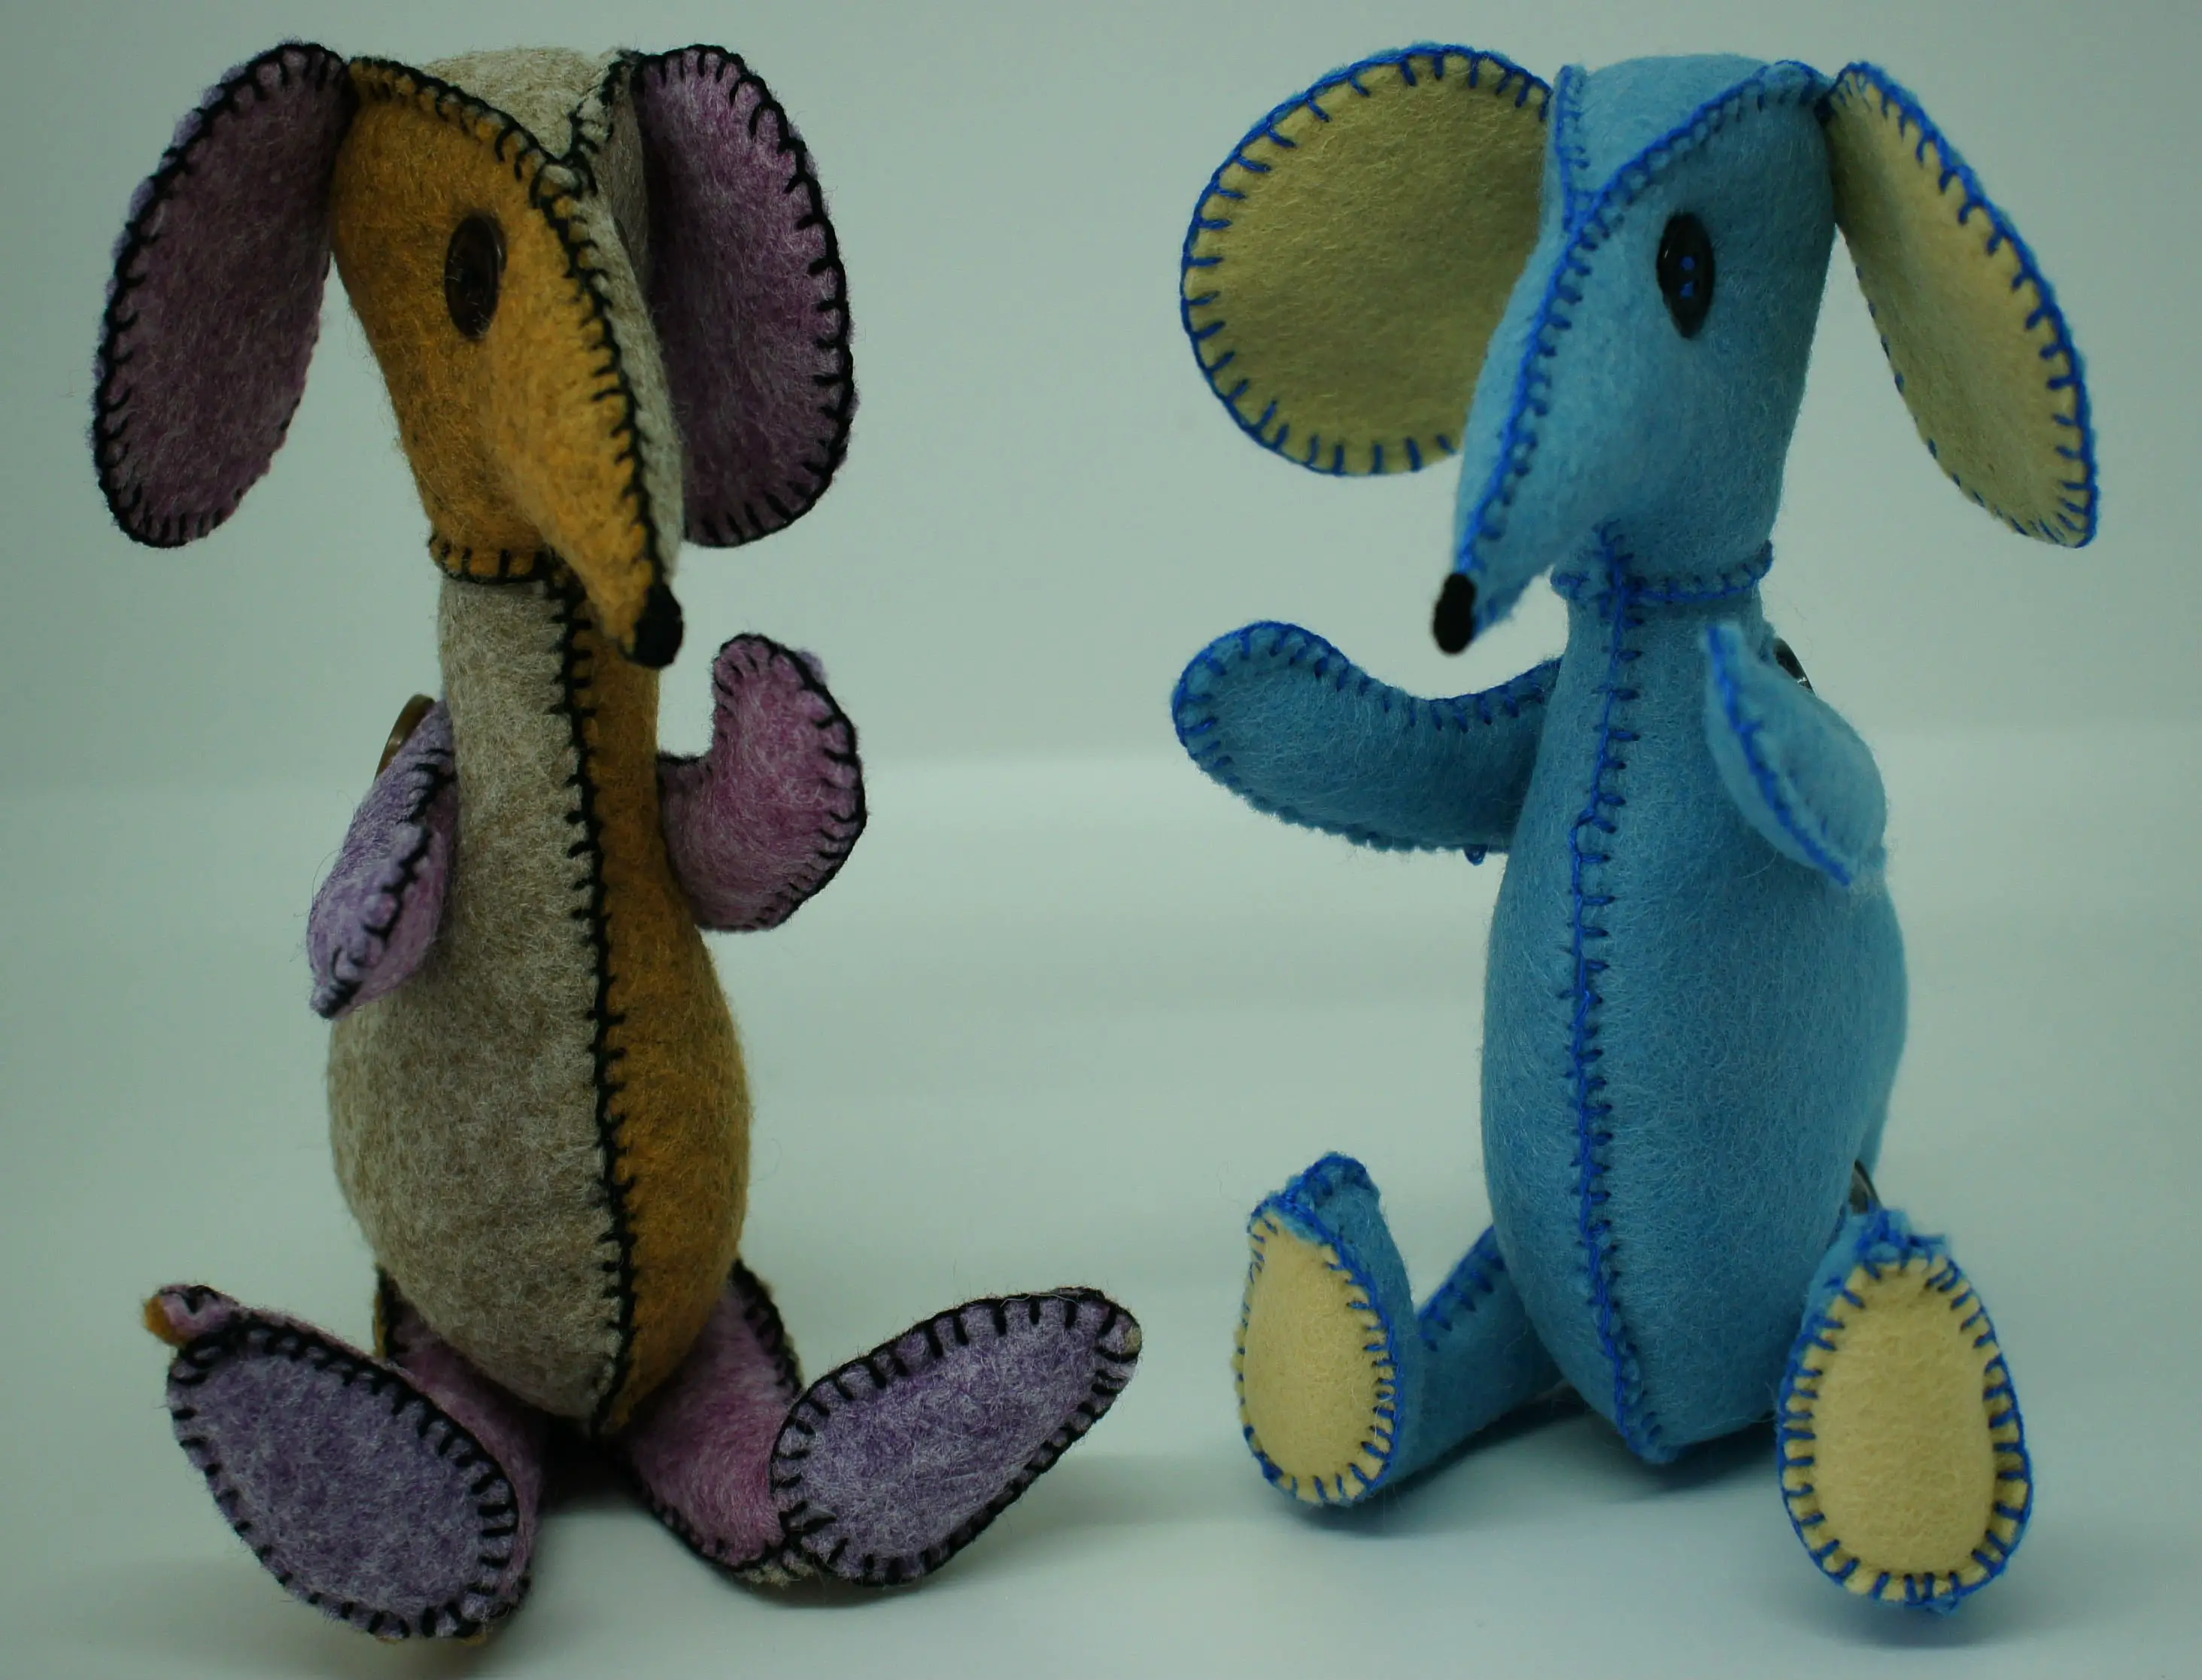 My completed felt mice from the House of Zandra button buddy mouse pattern.